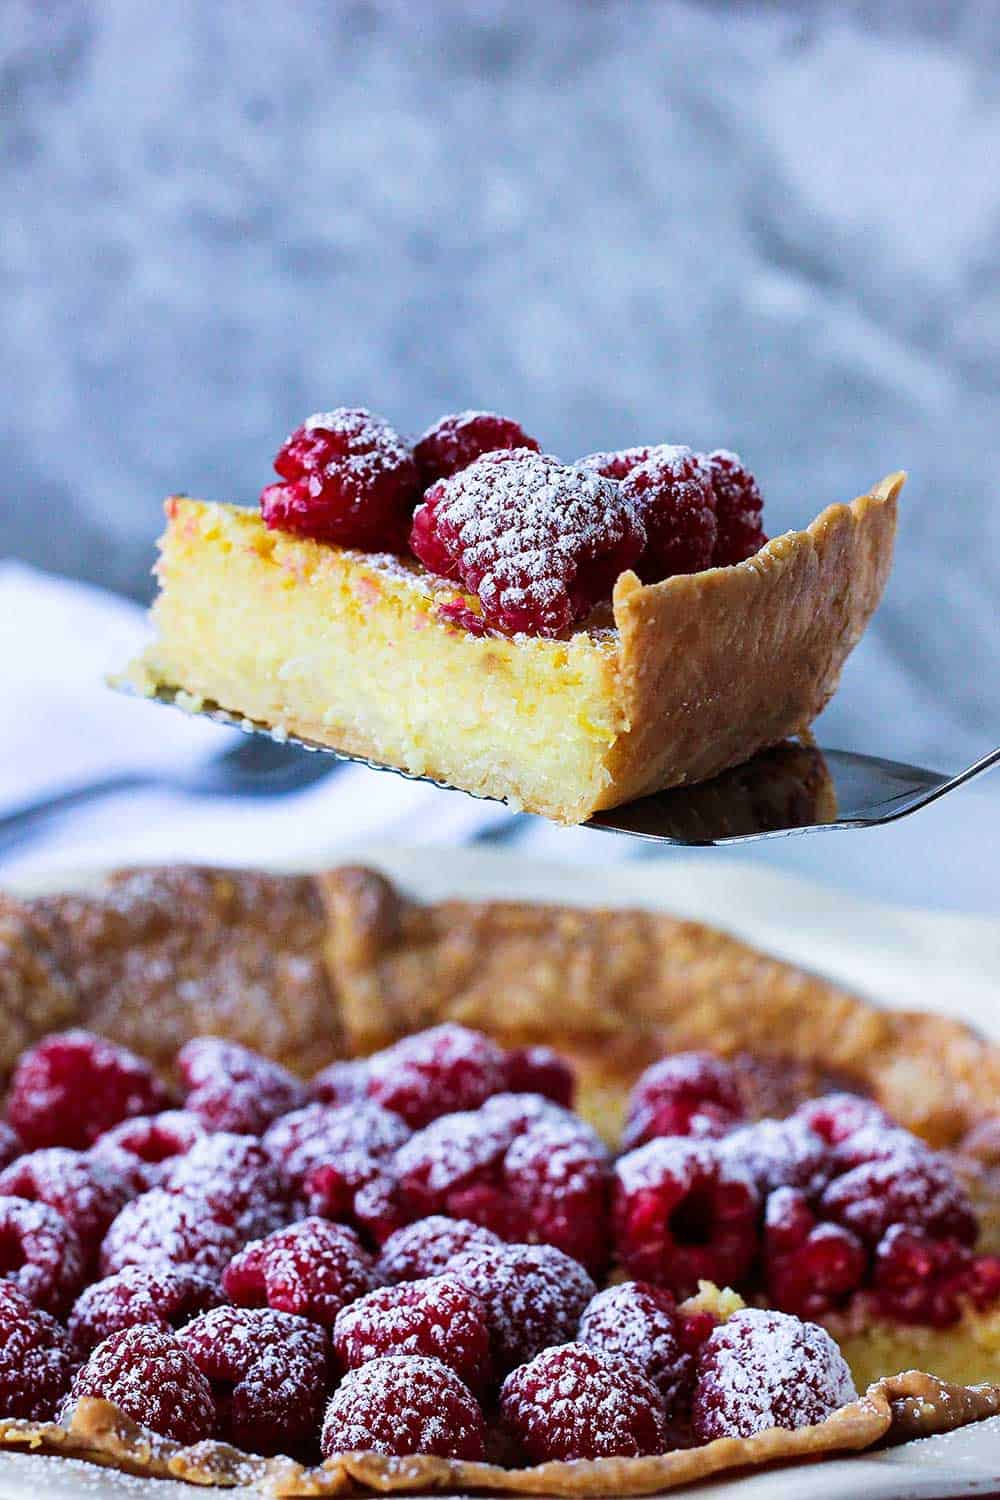 As slice of Chess Pie topped with raspberries and a sprinkling of powdered sugar being raised from the pie on a metal spatula.